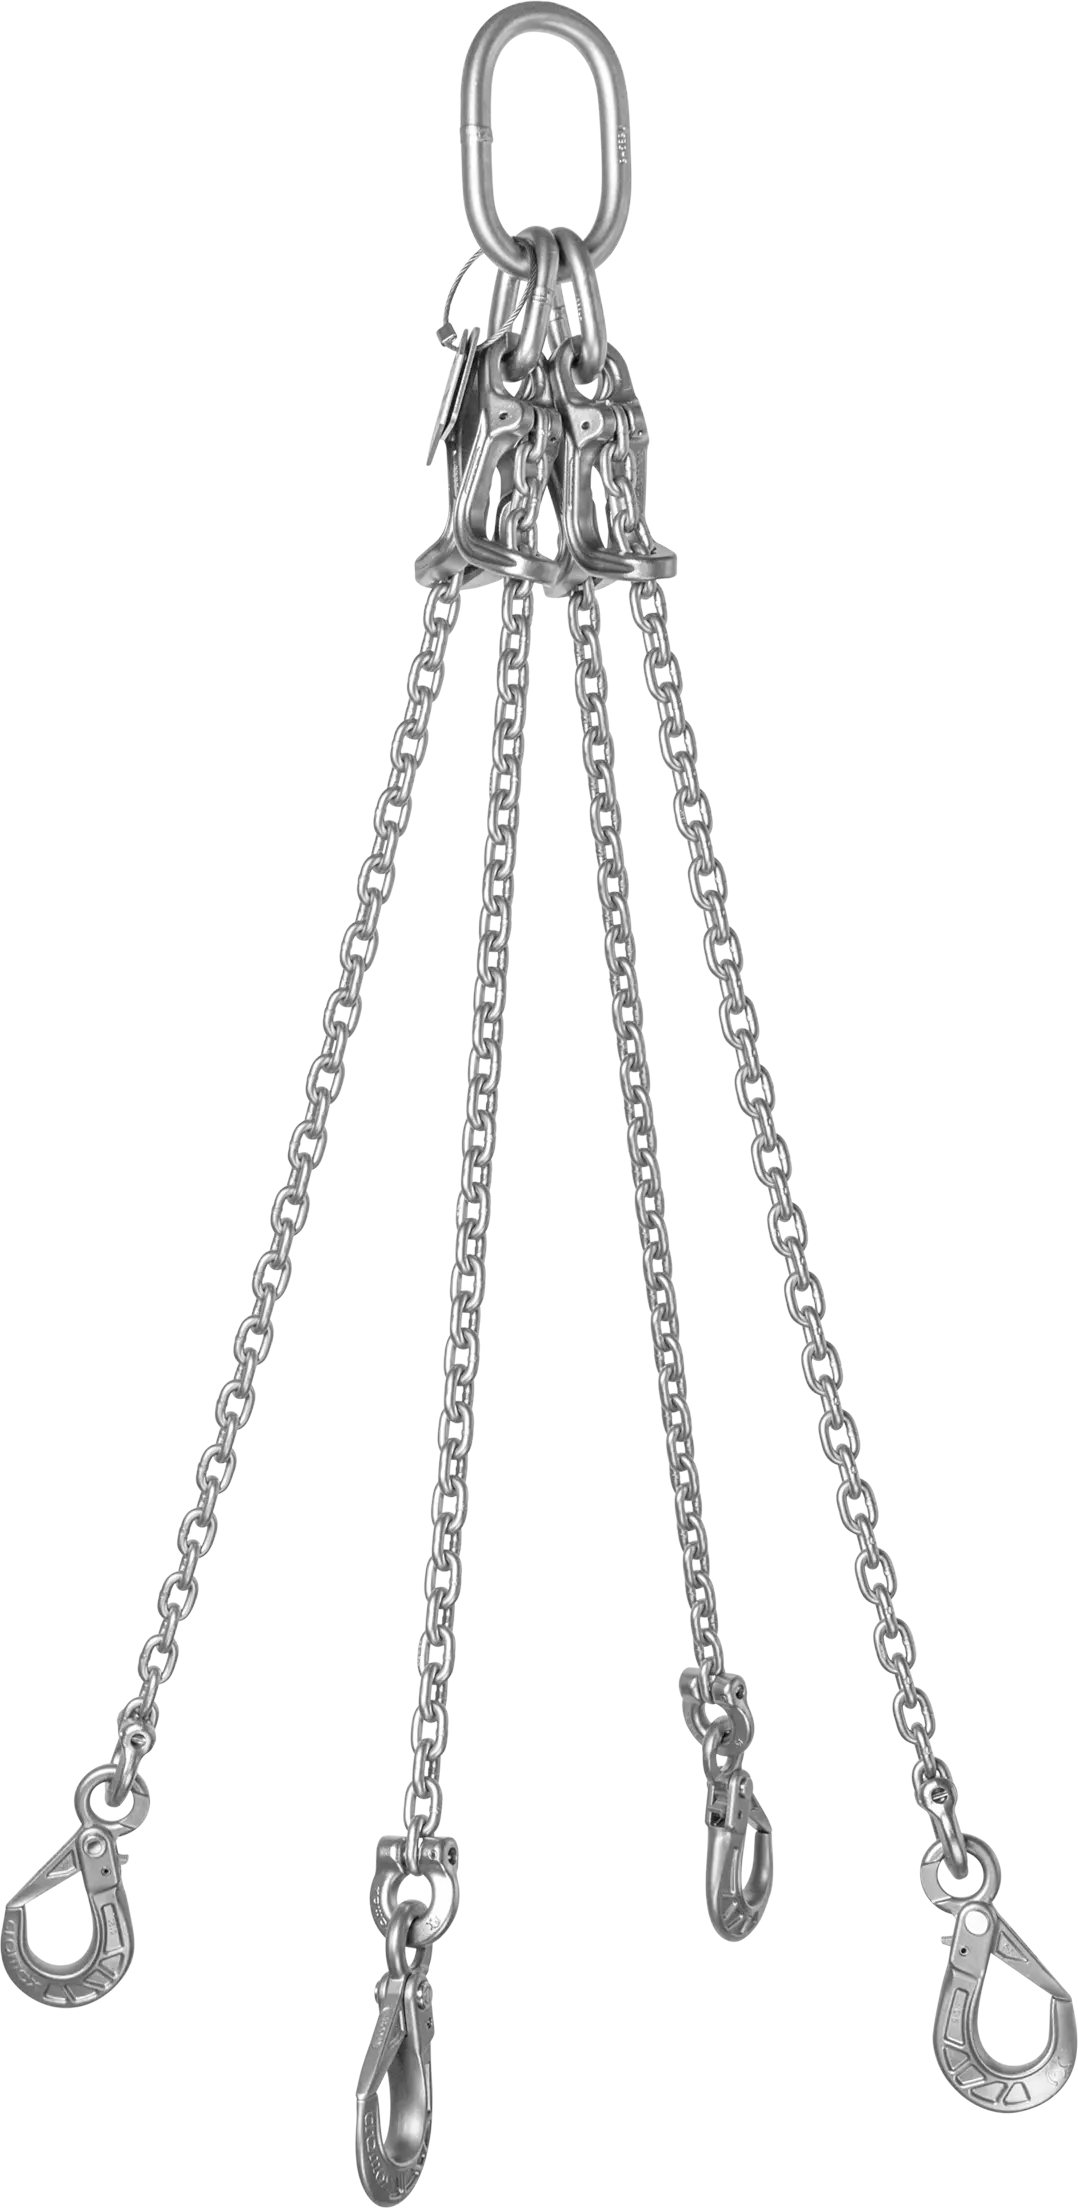 Stainless steel chain slings (4-leg) from cromox® (modular system with shortening attachment)